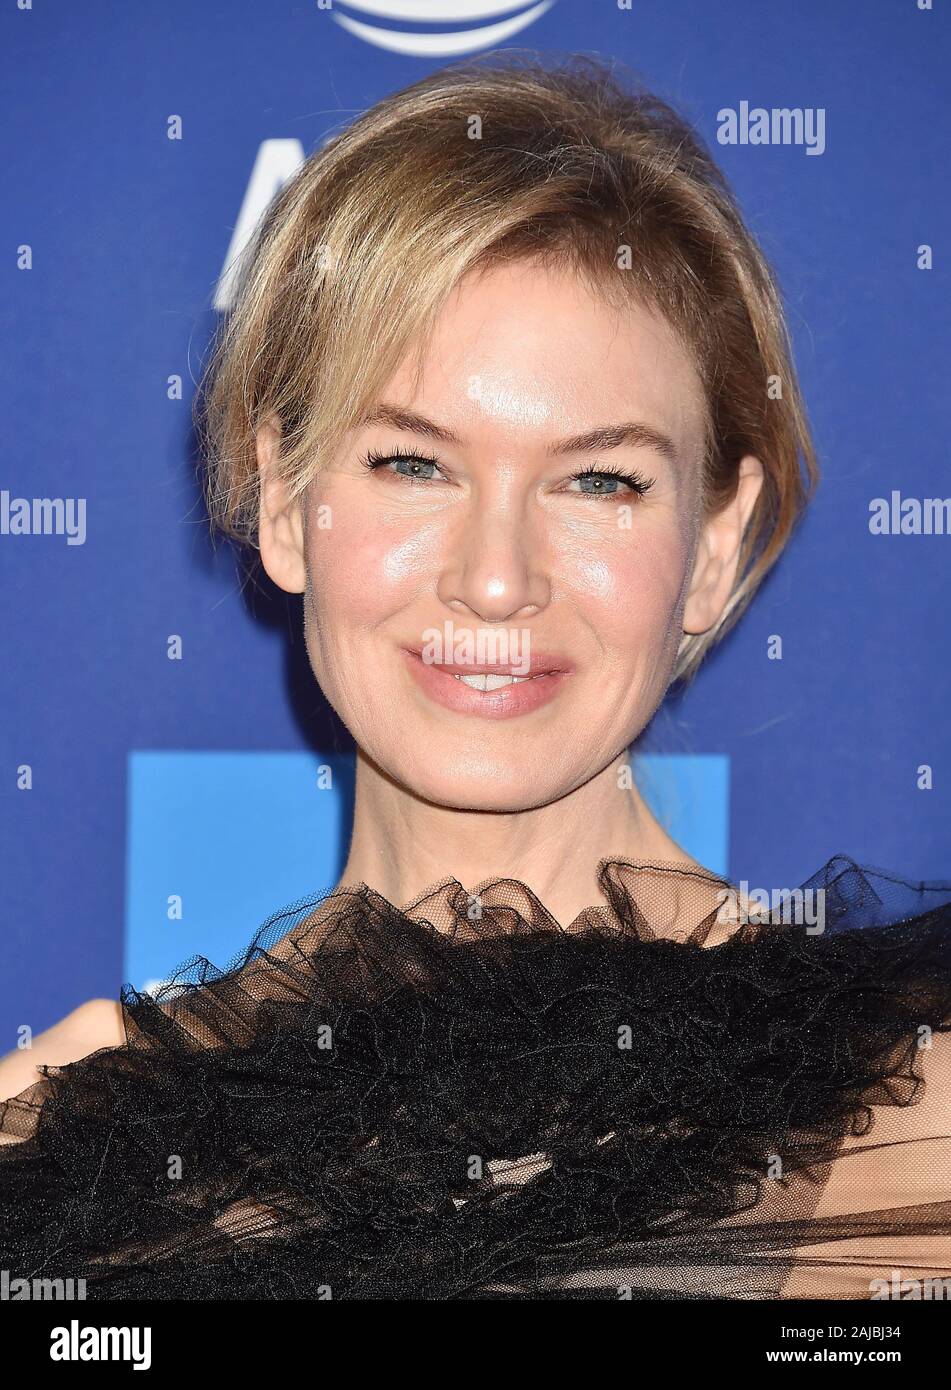 PALM SPRINGS, CA - JANUARY 02: Renée Zellweger attends the 31st Annual Palm Springs International Film Festival Film Awards Gala at Palm Springs Convention Center on January 02, 2020 in Palm Springs, California. Stock Photo